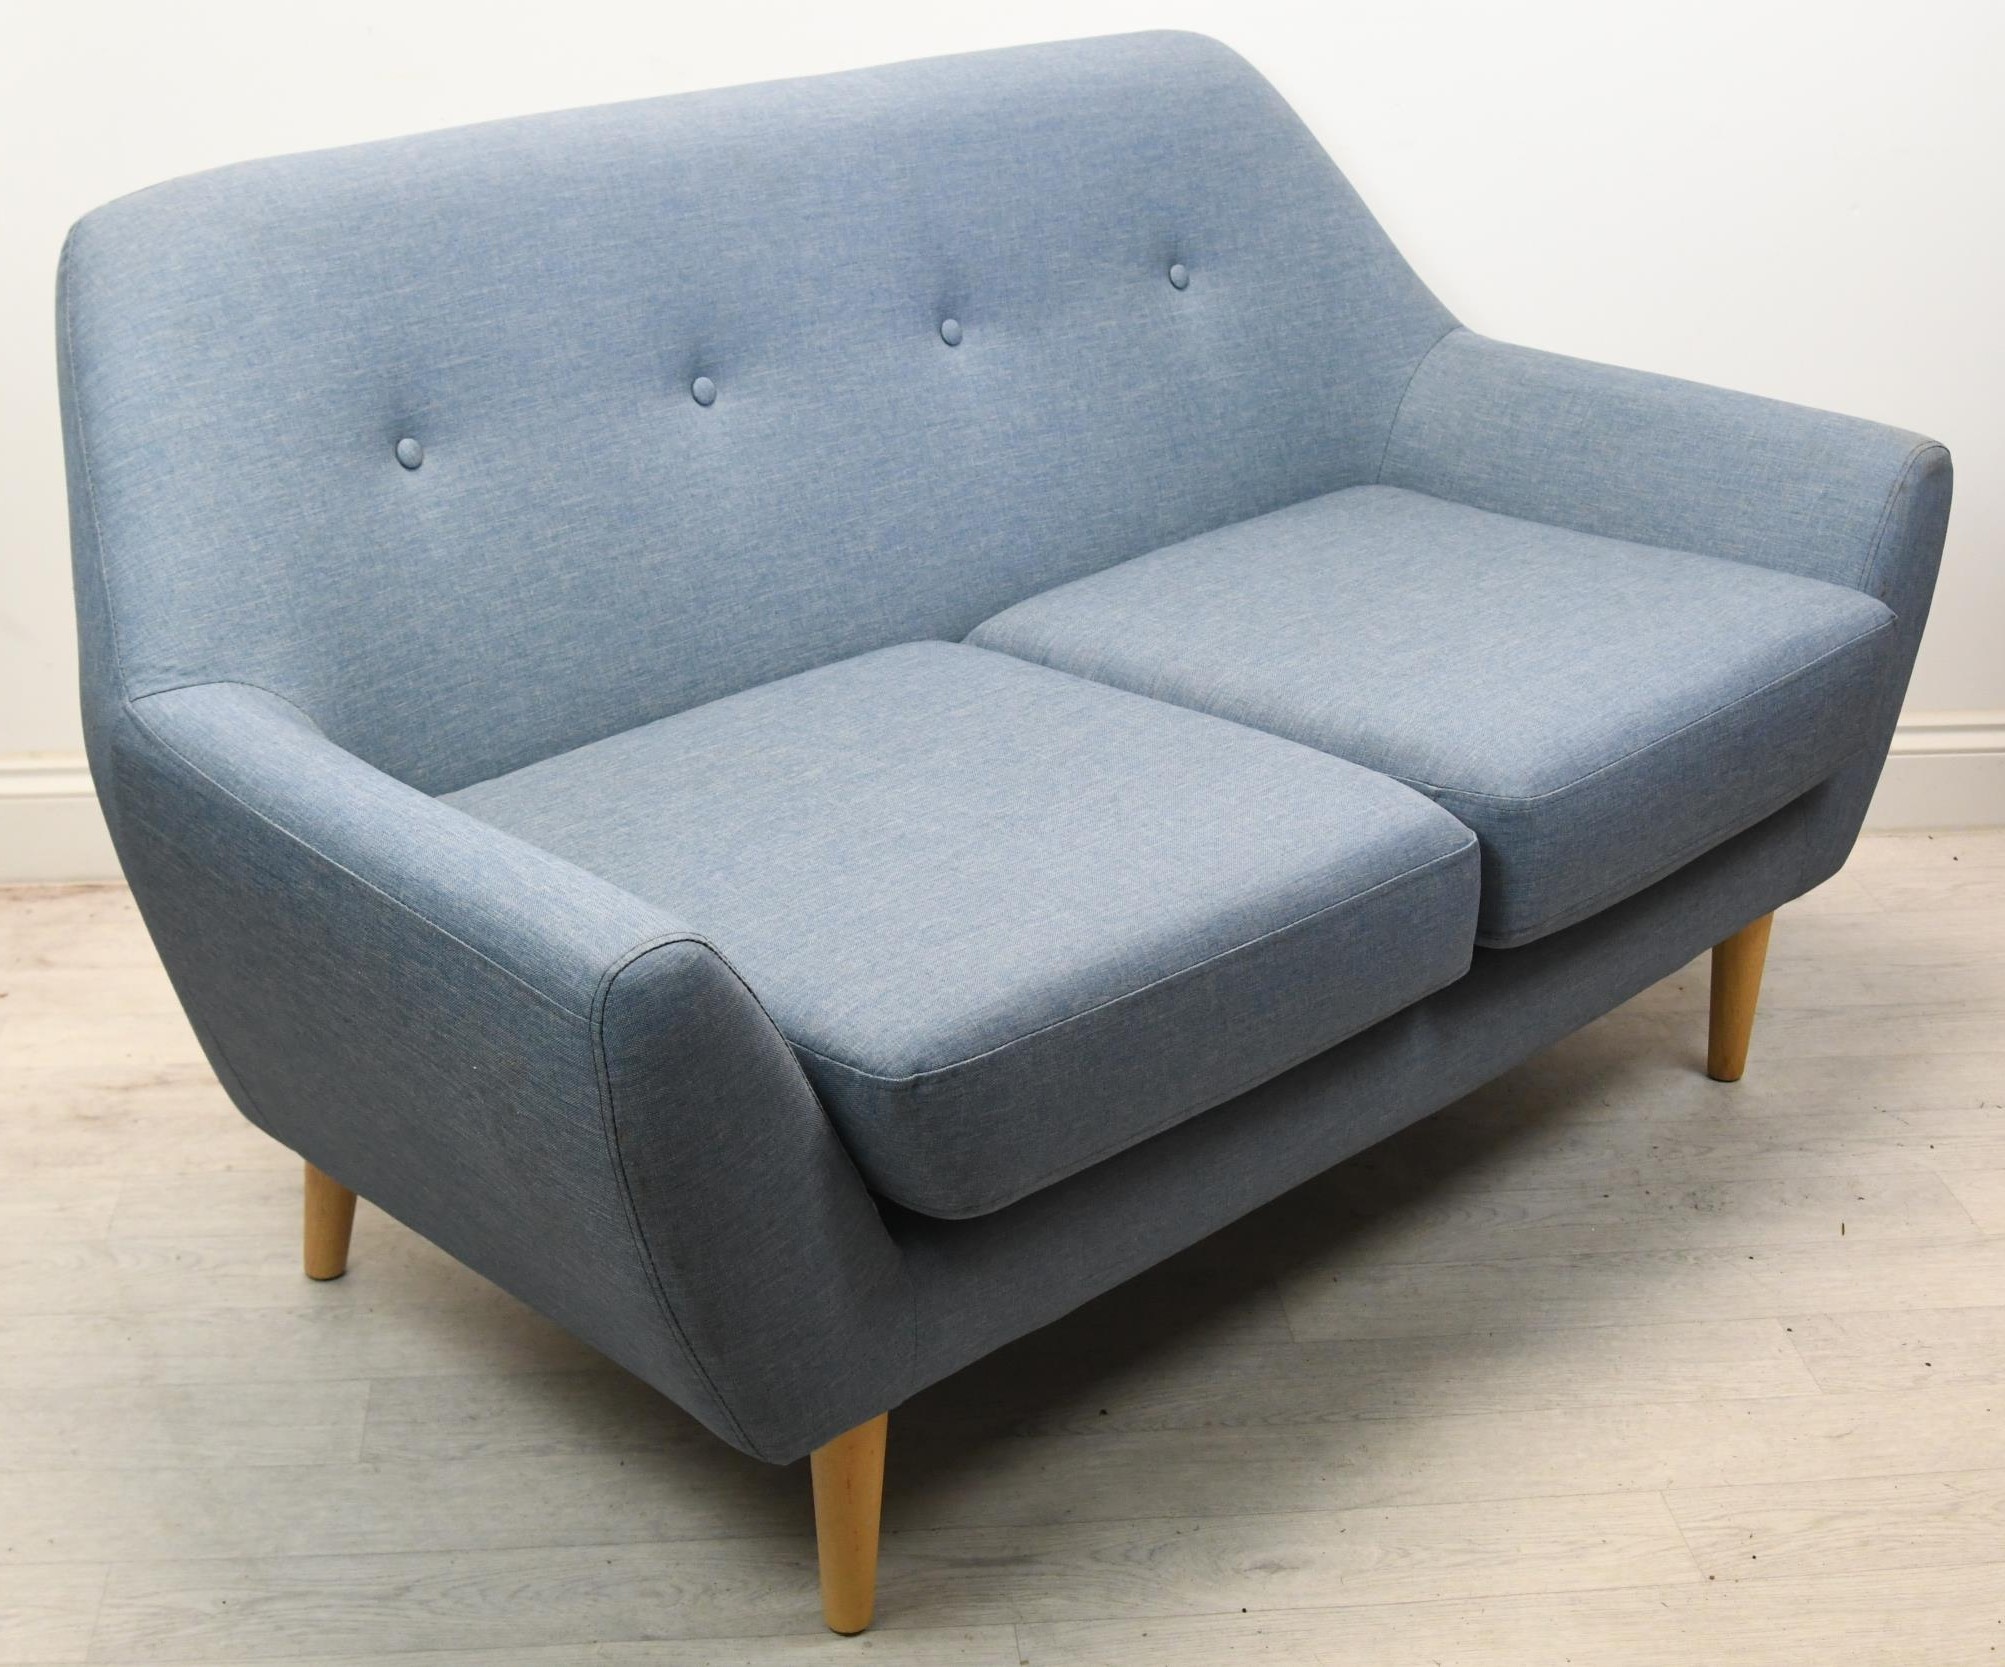 Sofa, contemporary upholstered, in the vintage style. H.79 W.138 D.75 - Image 2 of 2